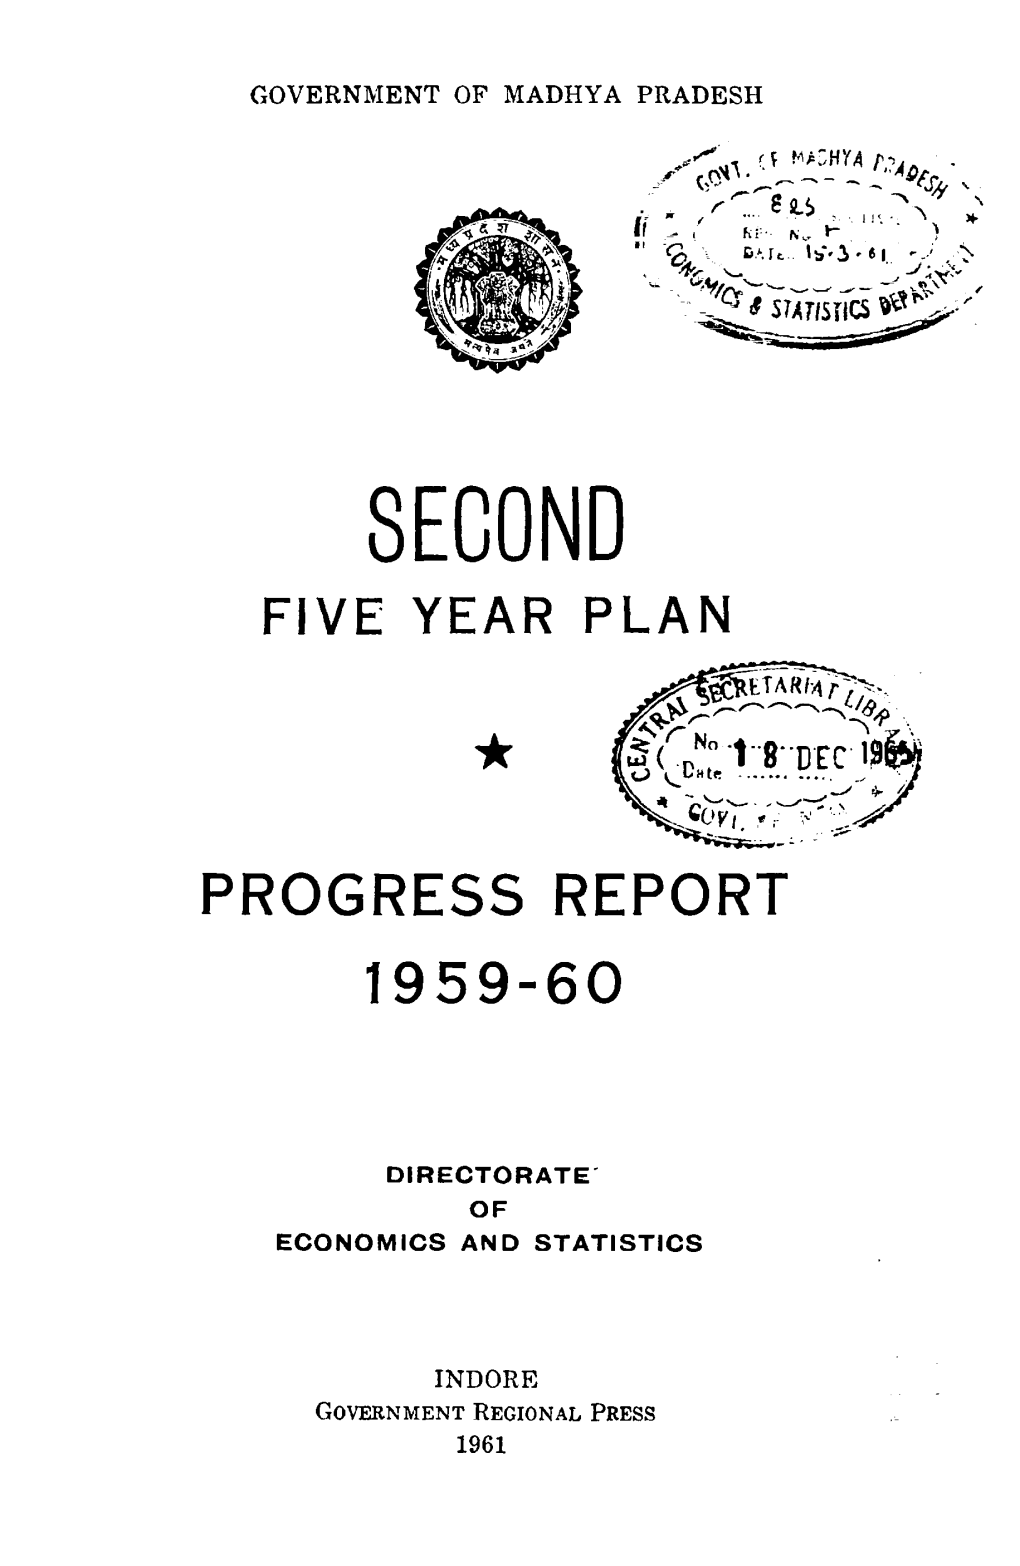 Second Five Year Plan